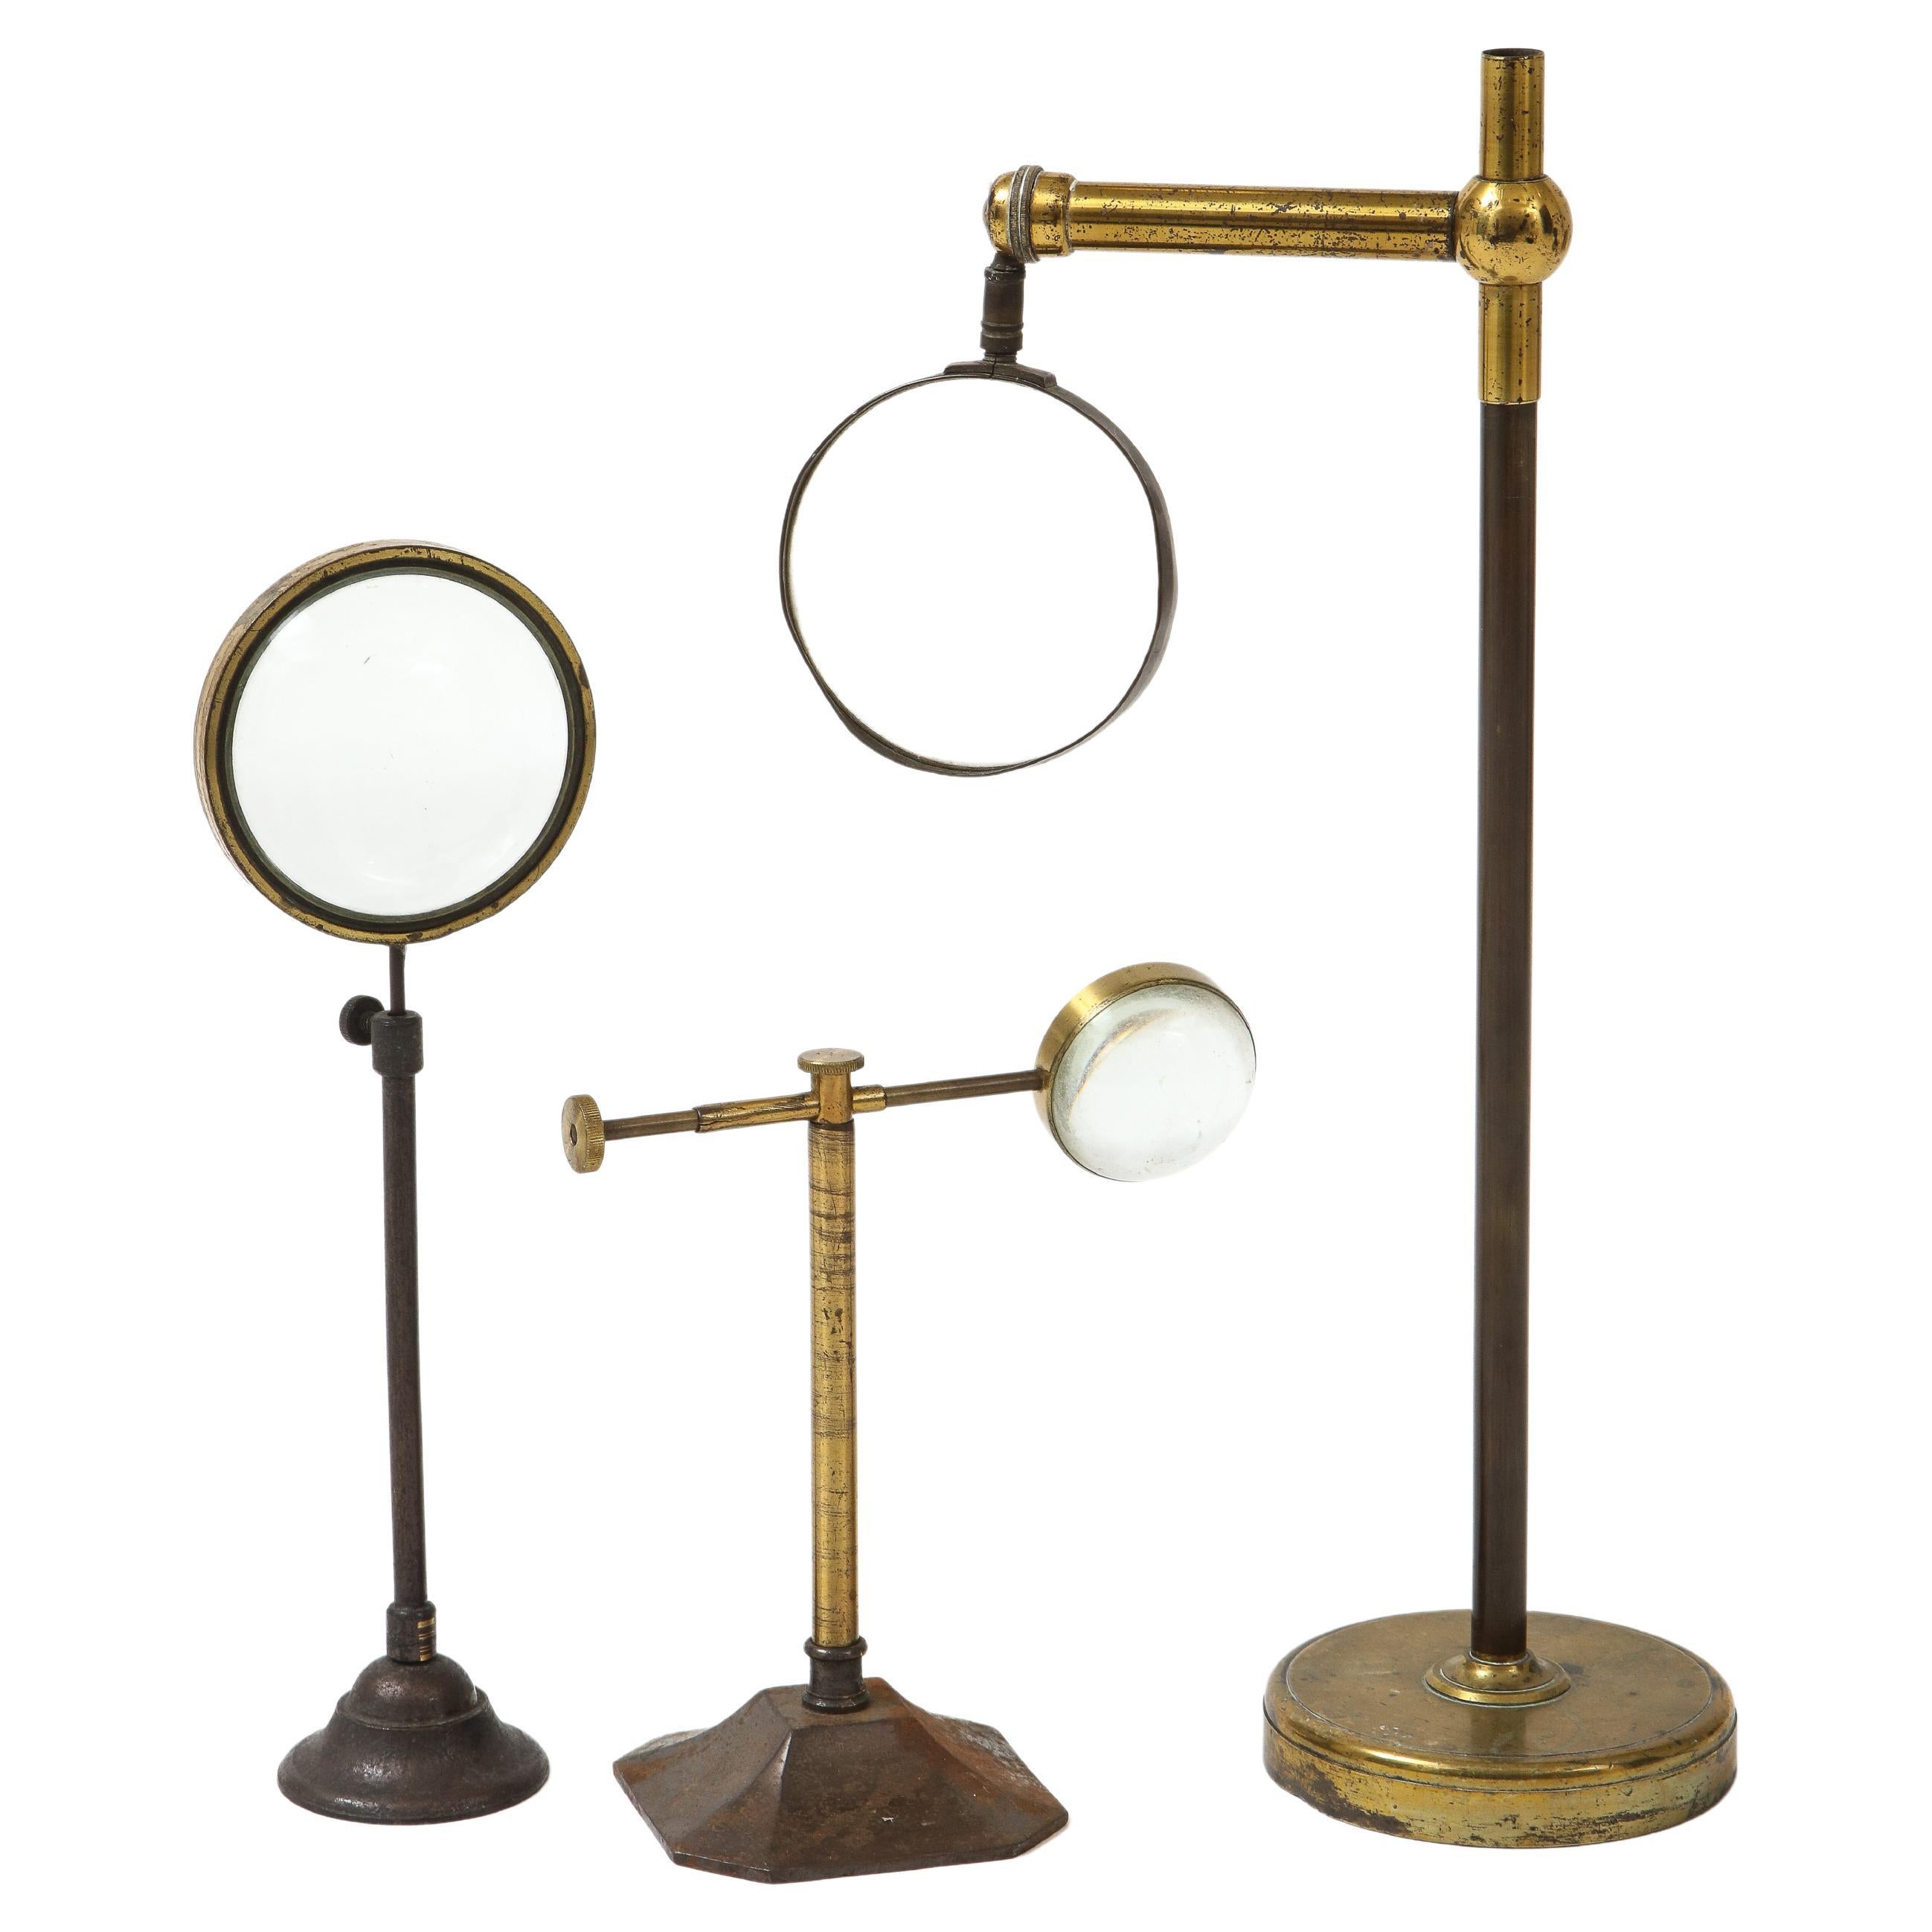 Details about   Vintage Style Desk Top Channer Magnifier Brass-Magnifying Glass on Wooden Stand 